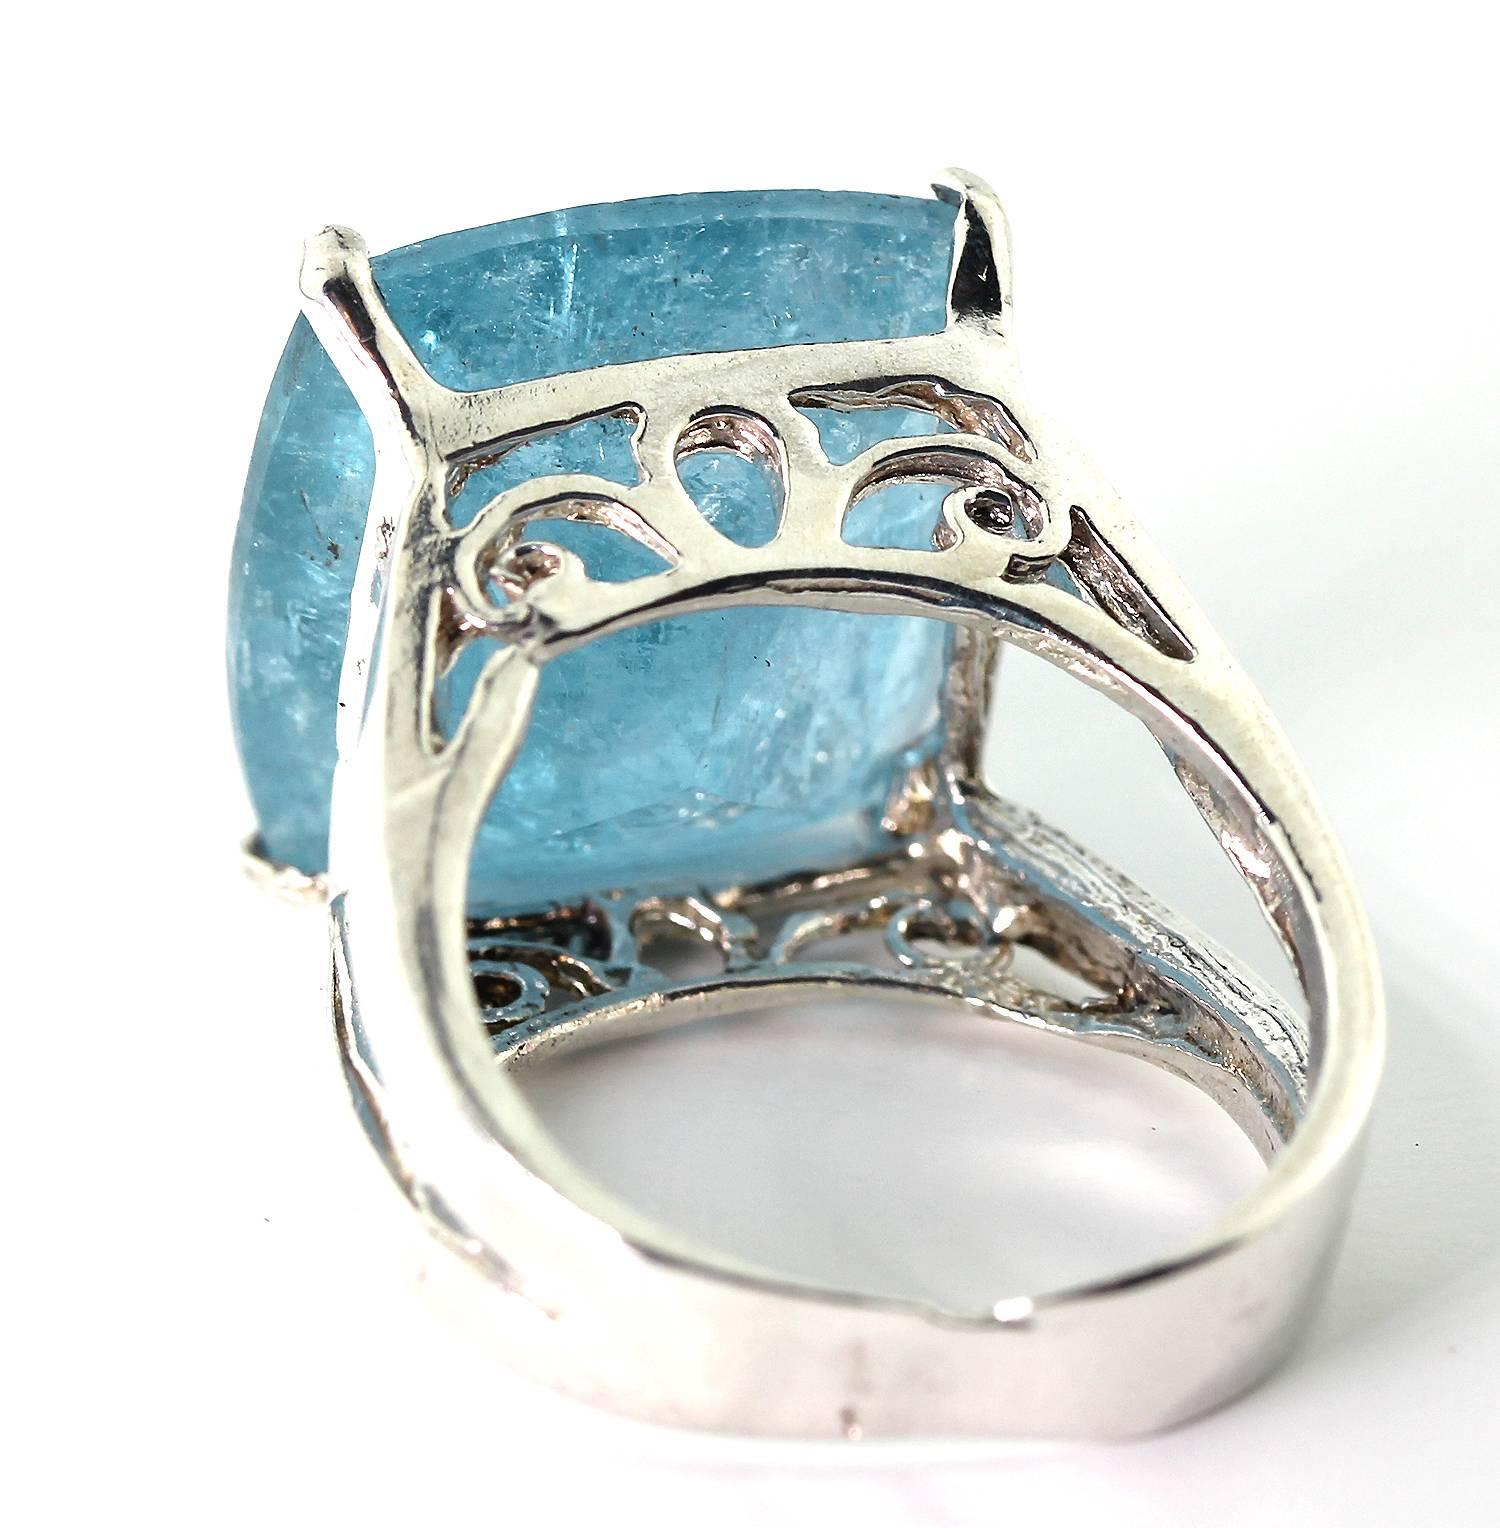 This 14 Carat huge blue glittering Aquamarine does have inclusions but they add charm to the thick delightful blue color of the transparency of the gemstone set in a handmade Sterling Silver.  This is beautifully cut and has no chips or nicks.
Size: